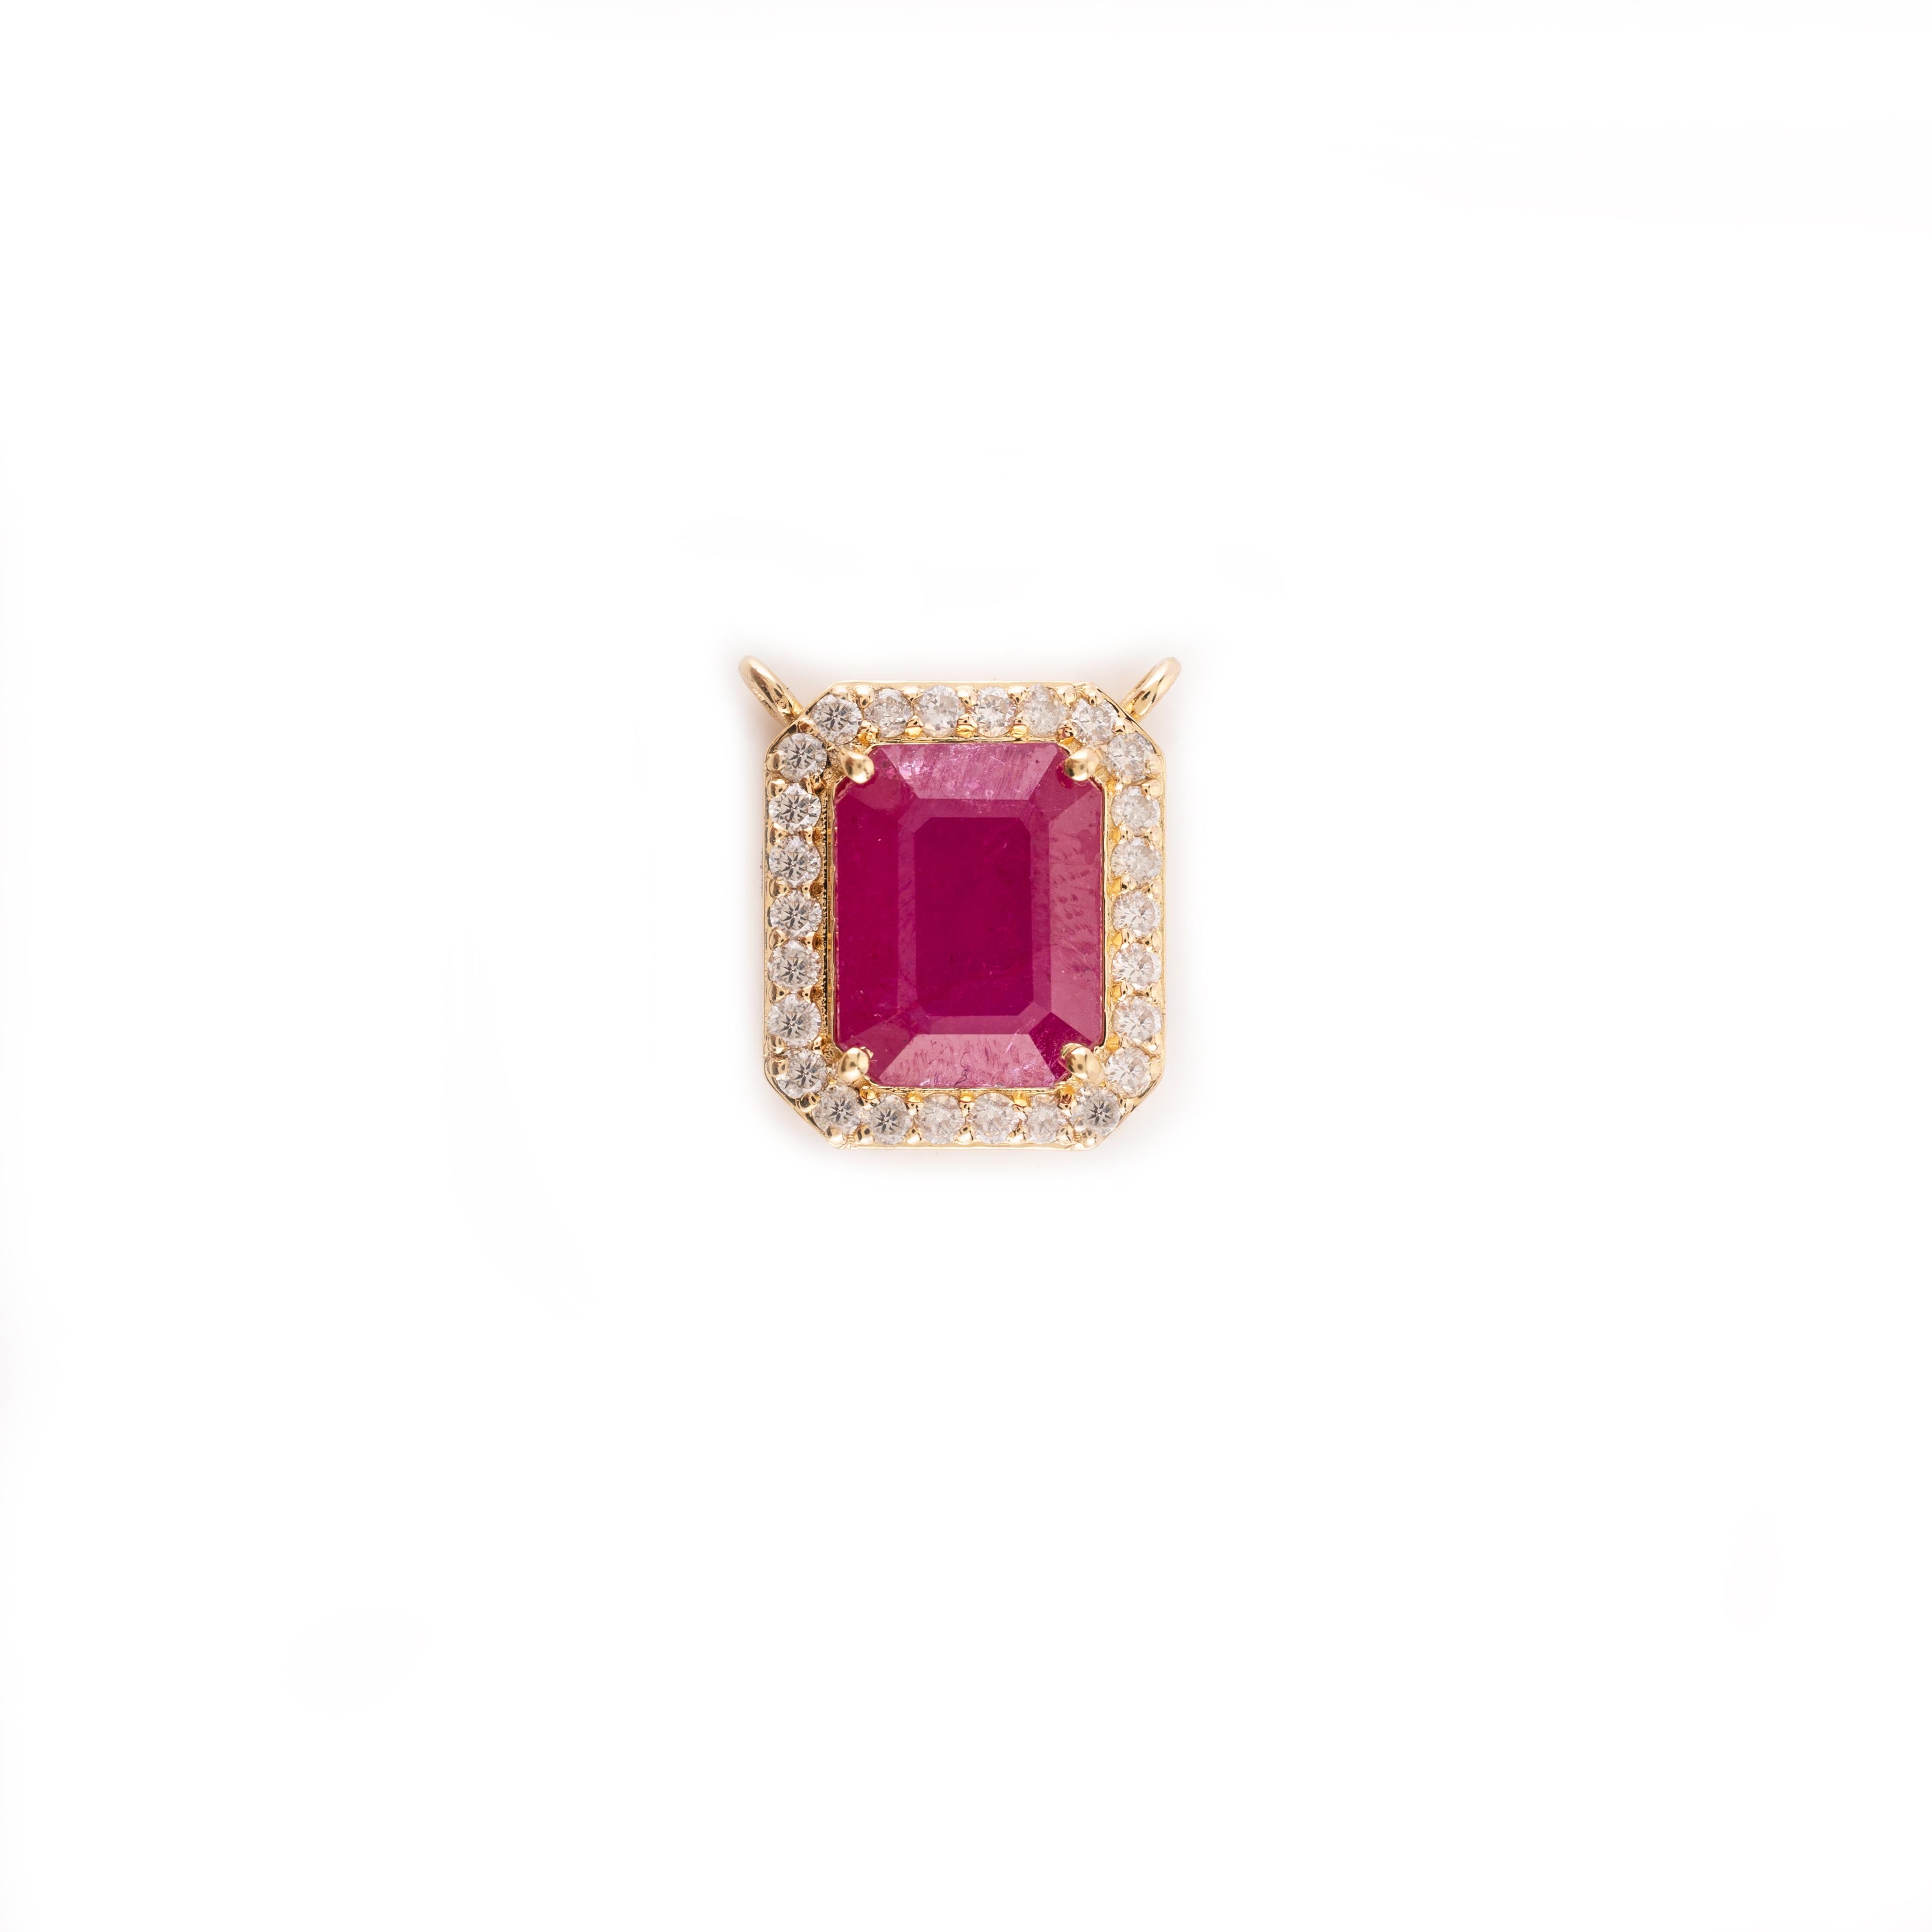 Octagon Ruby Diamond Halo Pendant in 18K Gold studded with ruby with halo of diamonds. This stunning piece of jewelry instantly elevates a casual look or dressy outfit. 
Ruby improves mental strength. 
Designed with octagon cut ruby with diamonds